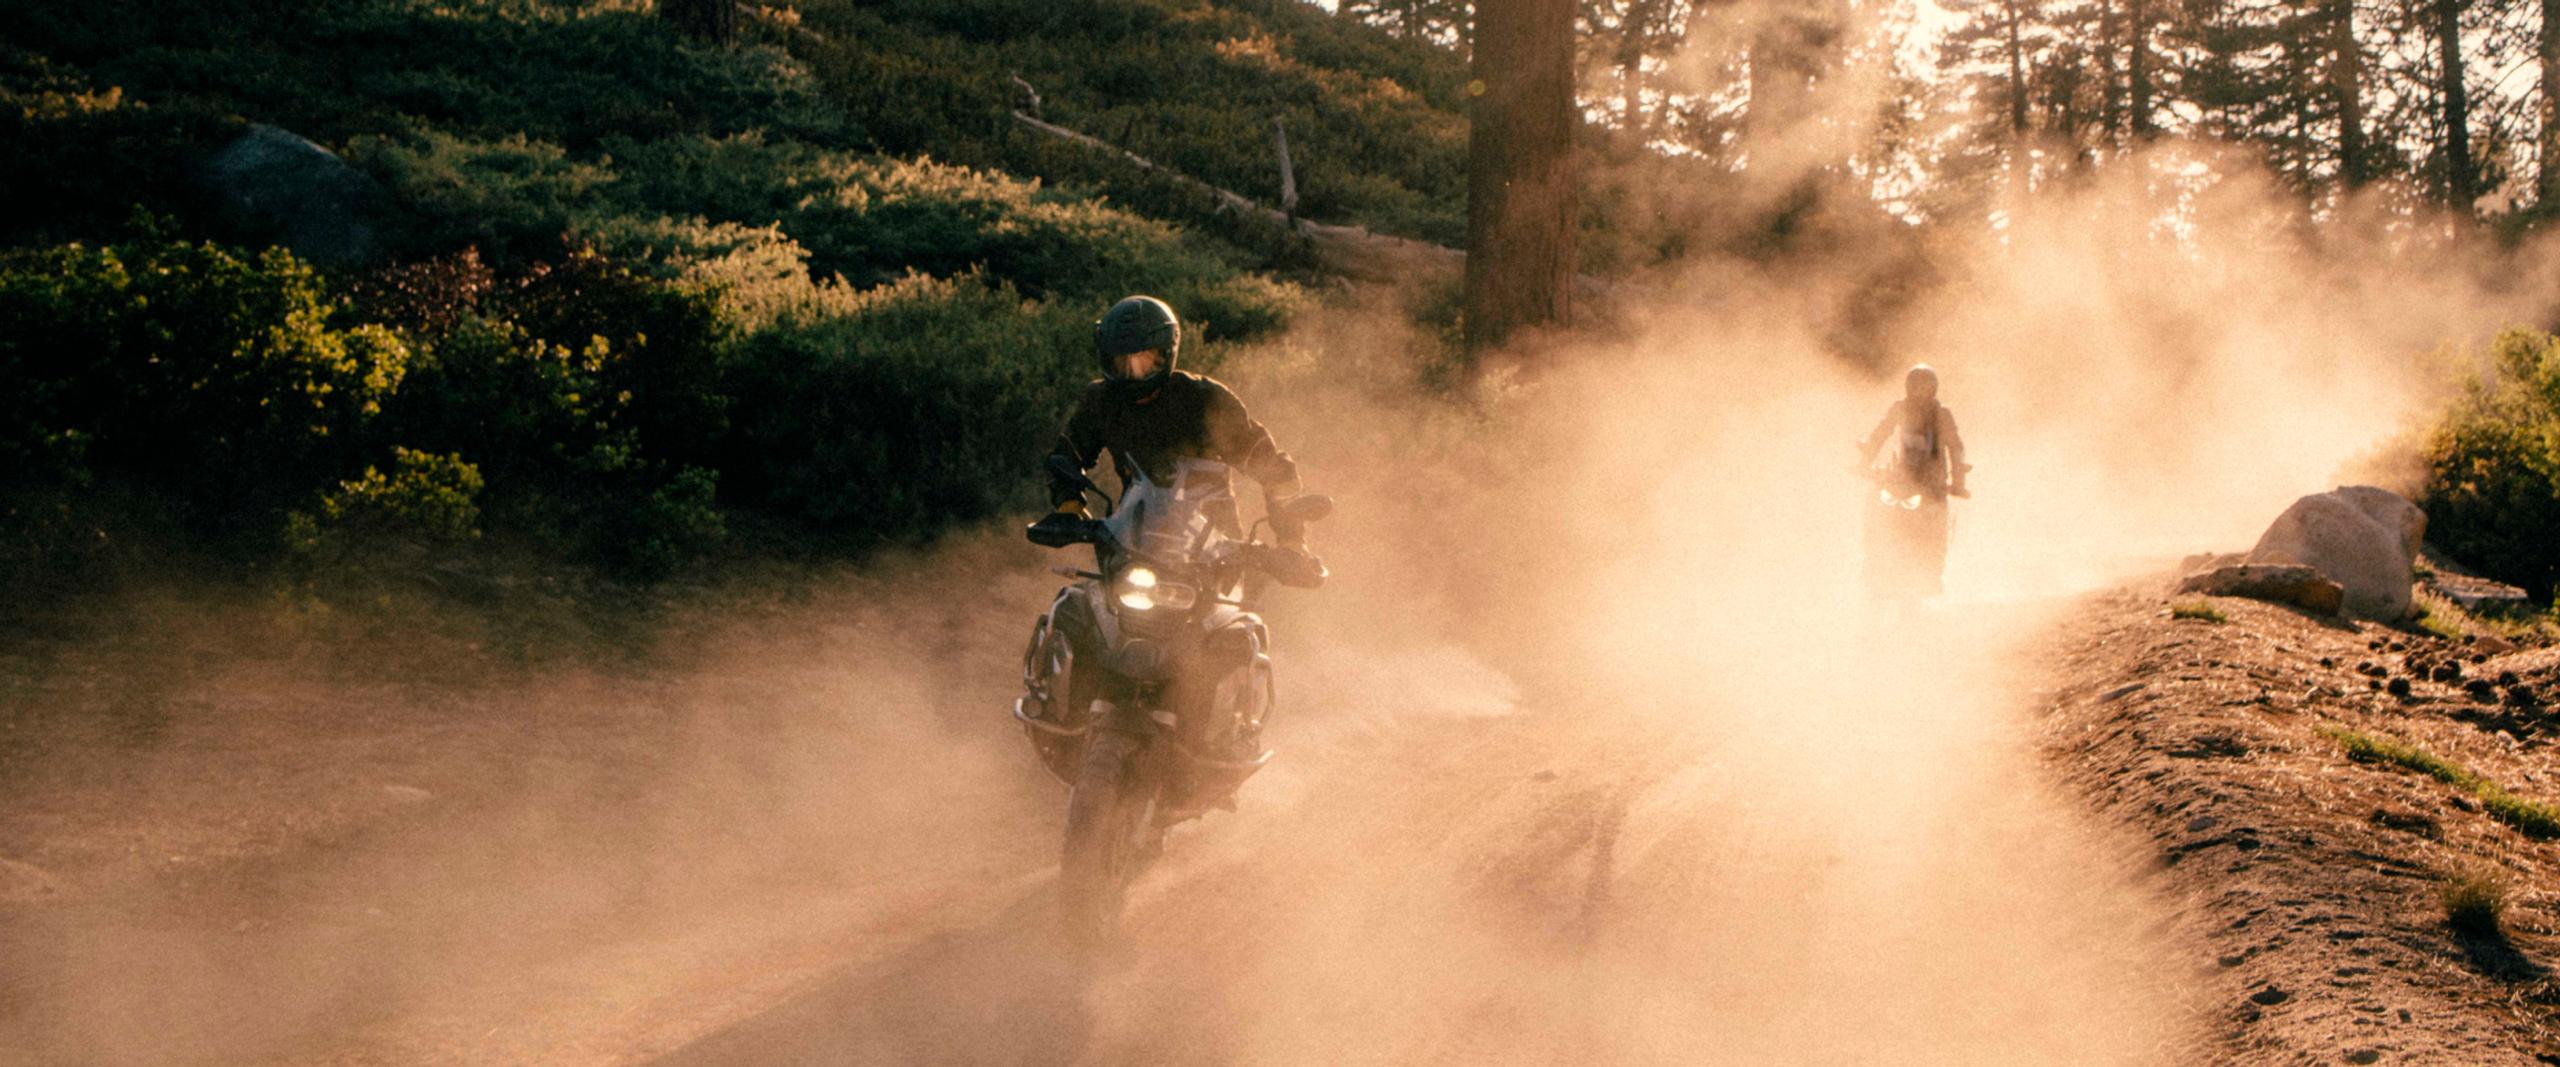 Two motorcyclists kicking up dust clouds riding through Big Bear, California